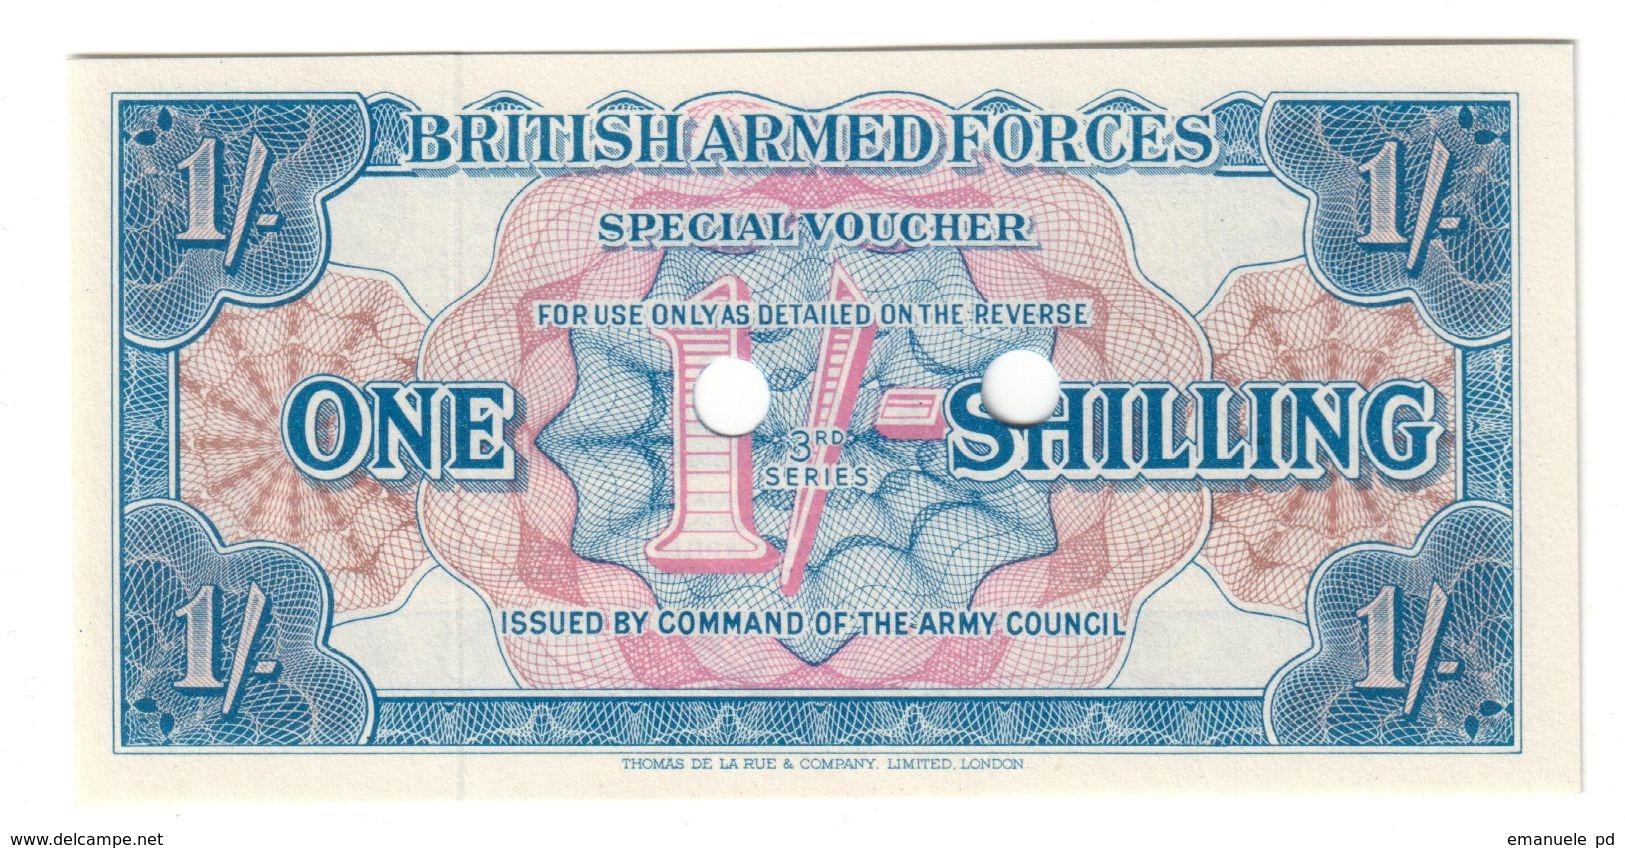 Great Britain - Military 1 Shilling 3th Series 1956  UNC .C. - British Armed Forces & Special Vouchers